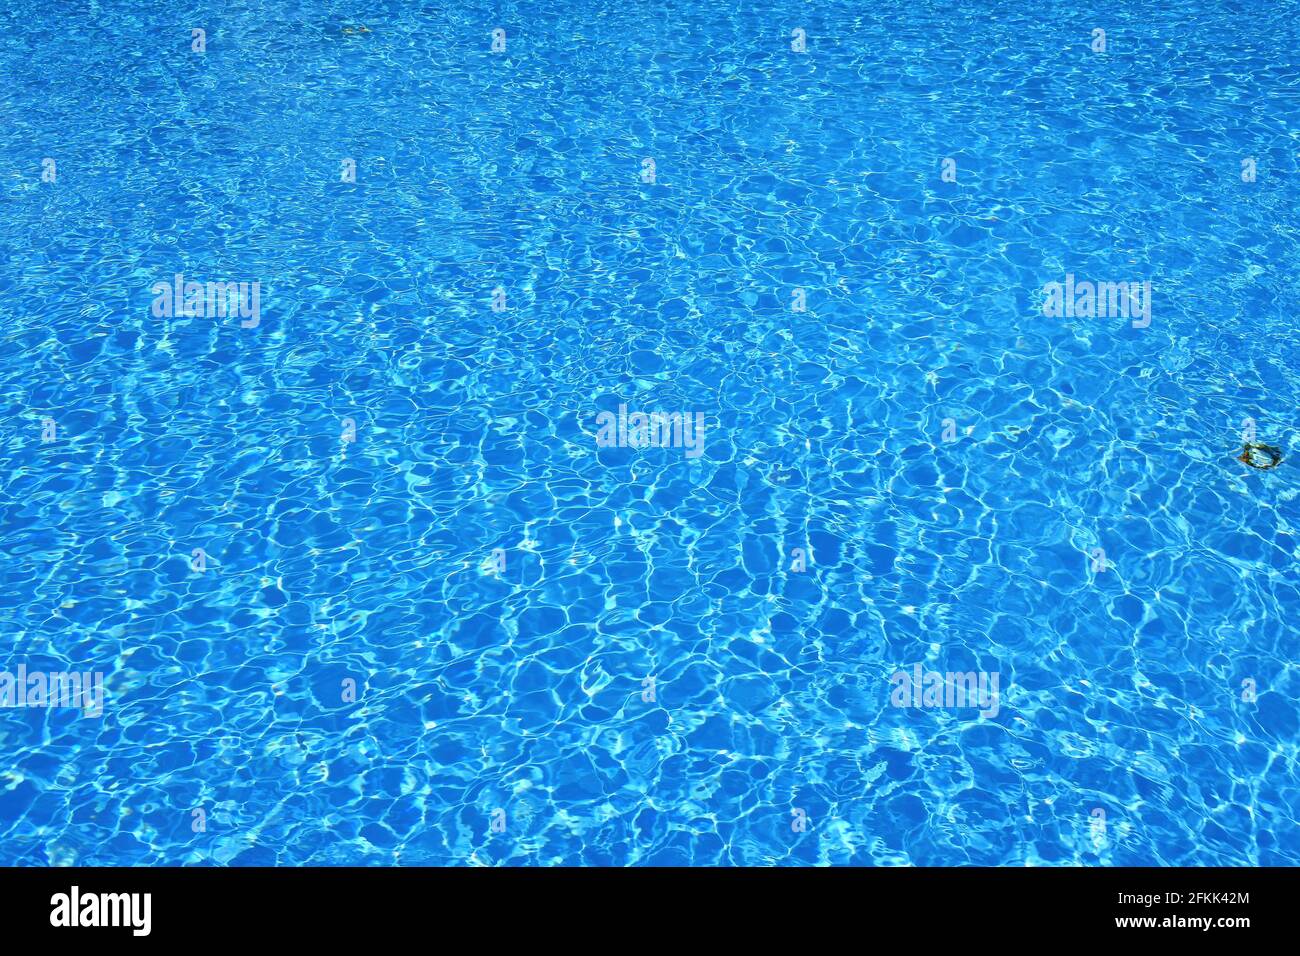 Rippled blue water surface. Water level in the pool. Light reflections on the surface of the water full of ripples. Stock Photo